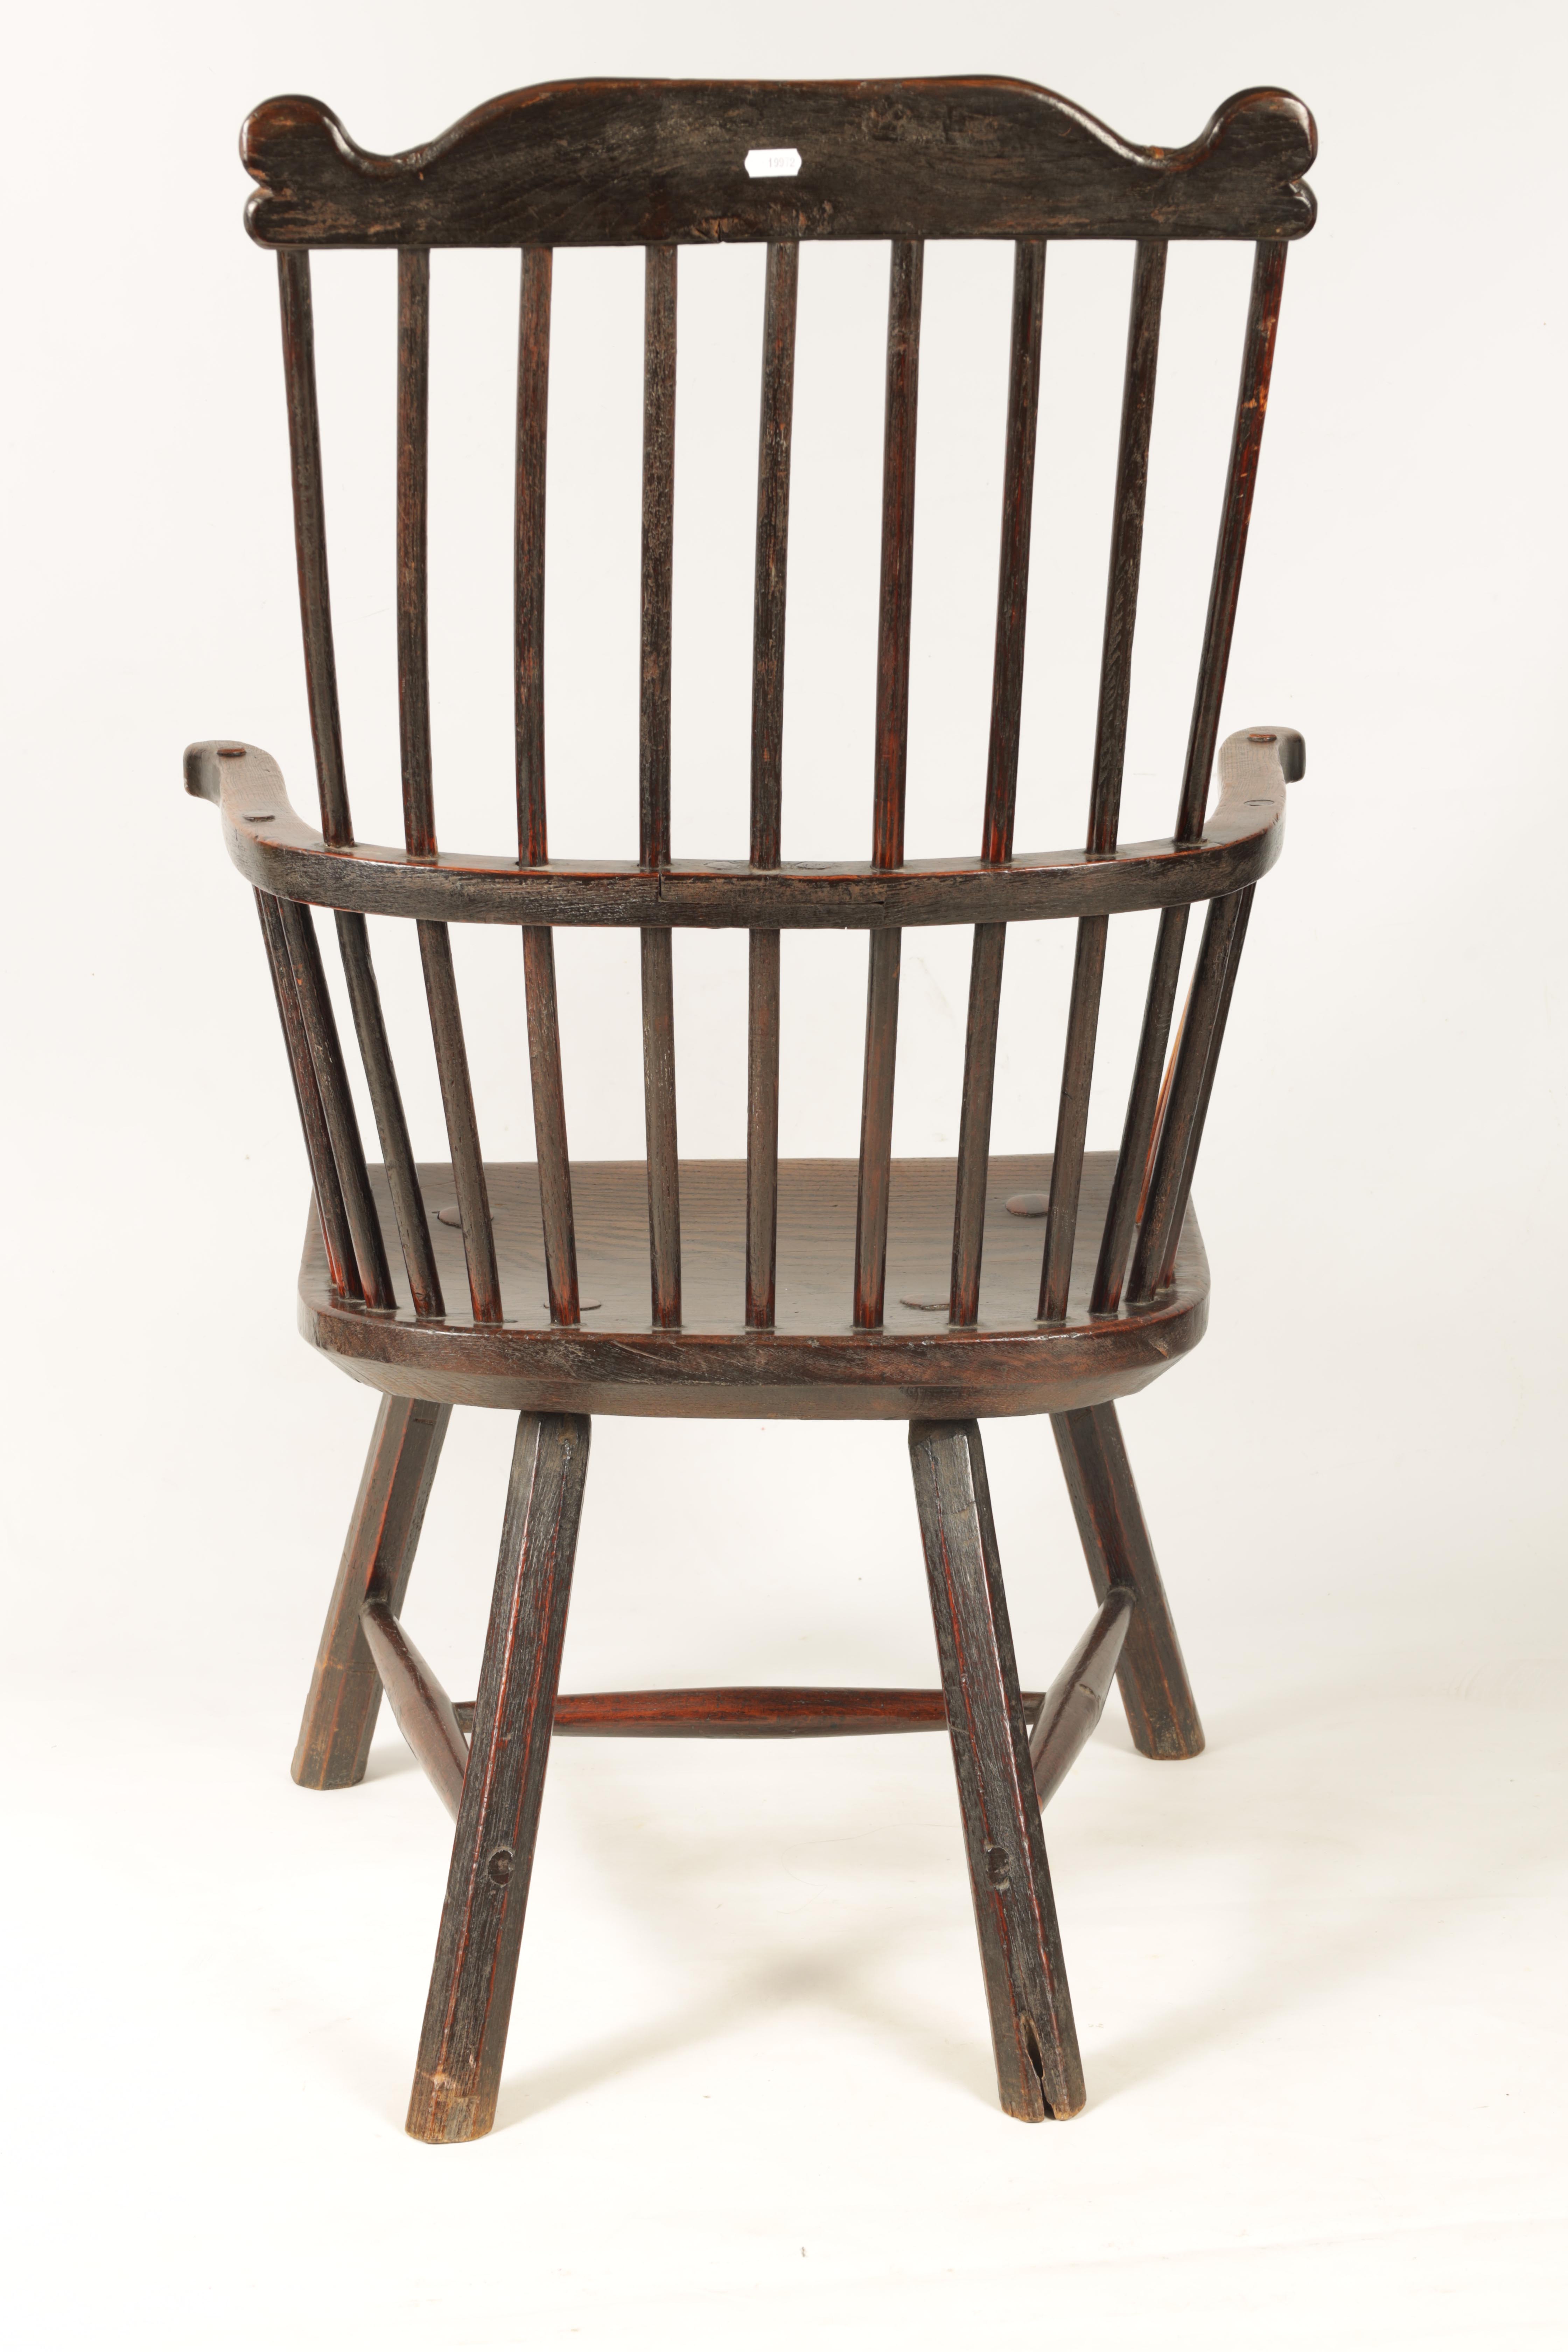 A GOOD 18TH CENTURY THAMES VALLEY OAK AND ELM WINDSOR CHAIR with shaped top rail and flared arms, - Image 8 of 11